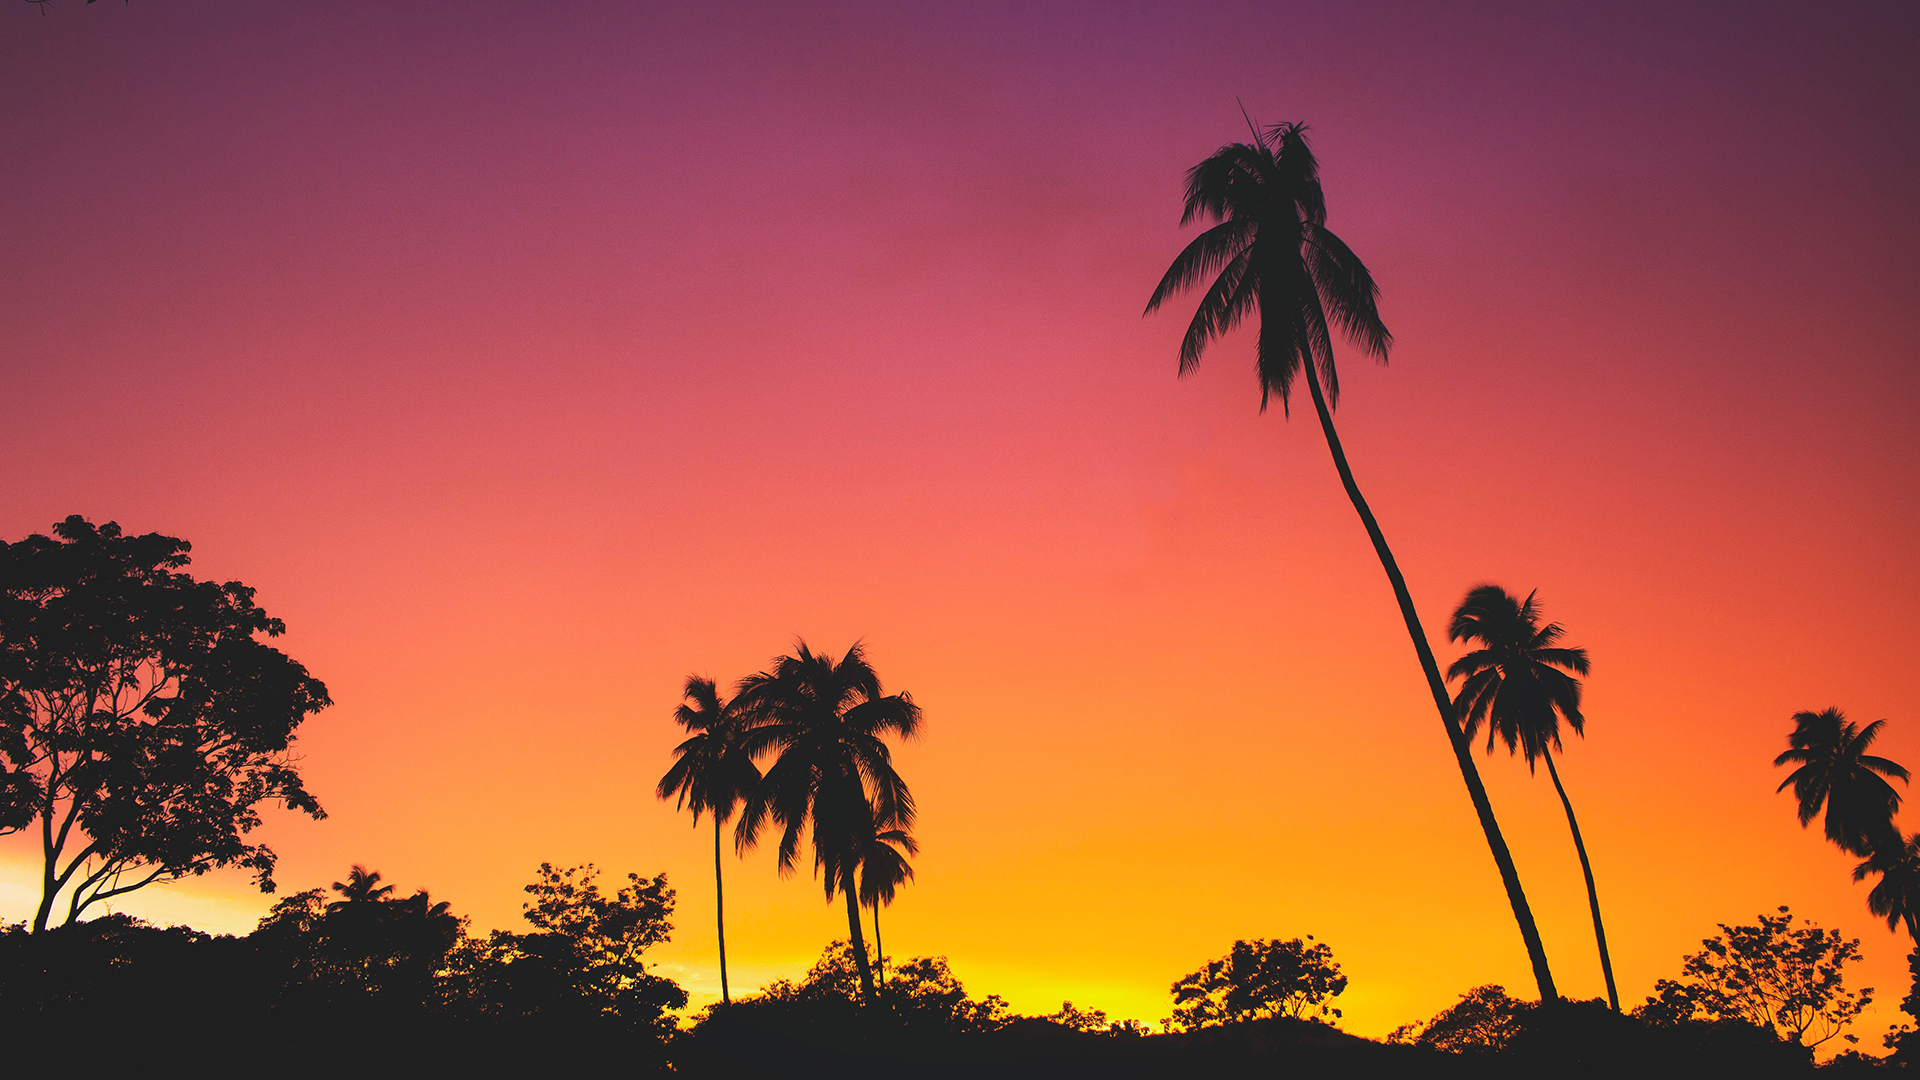 General 1920x1080 silhouette sunset low-angle orange sky palm trees warm colors dusk